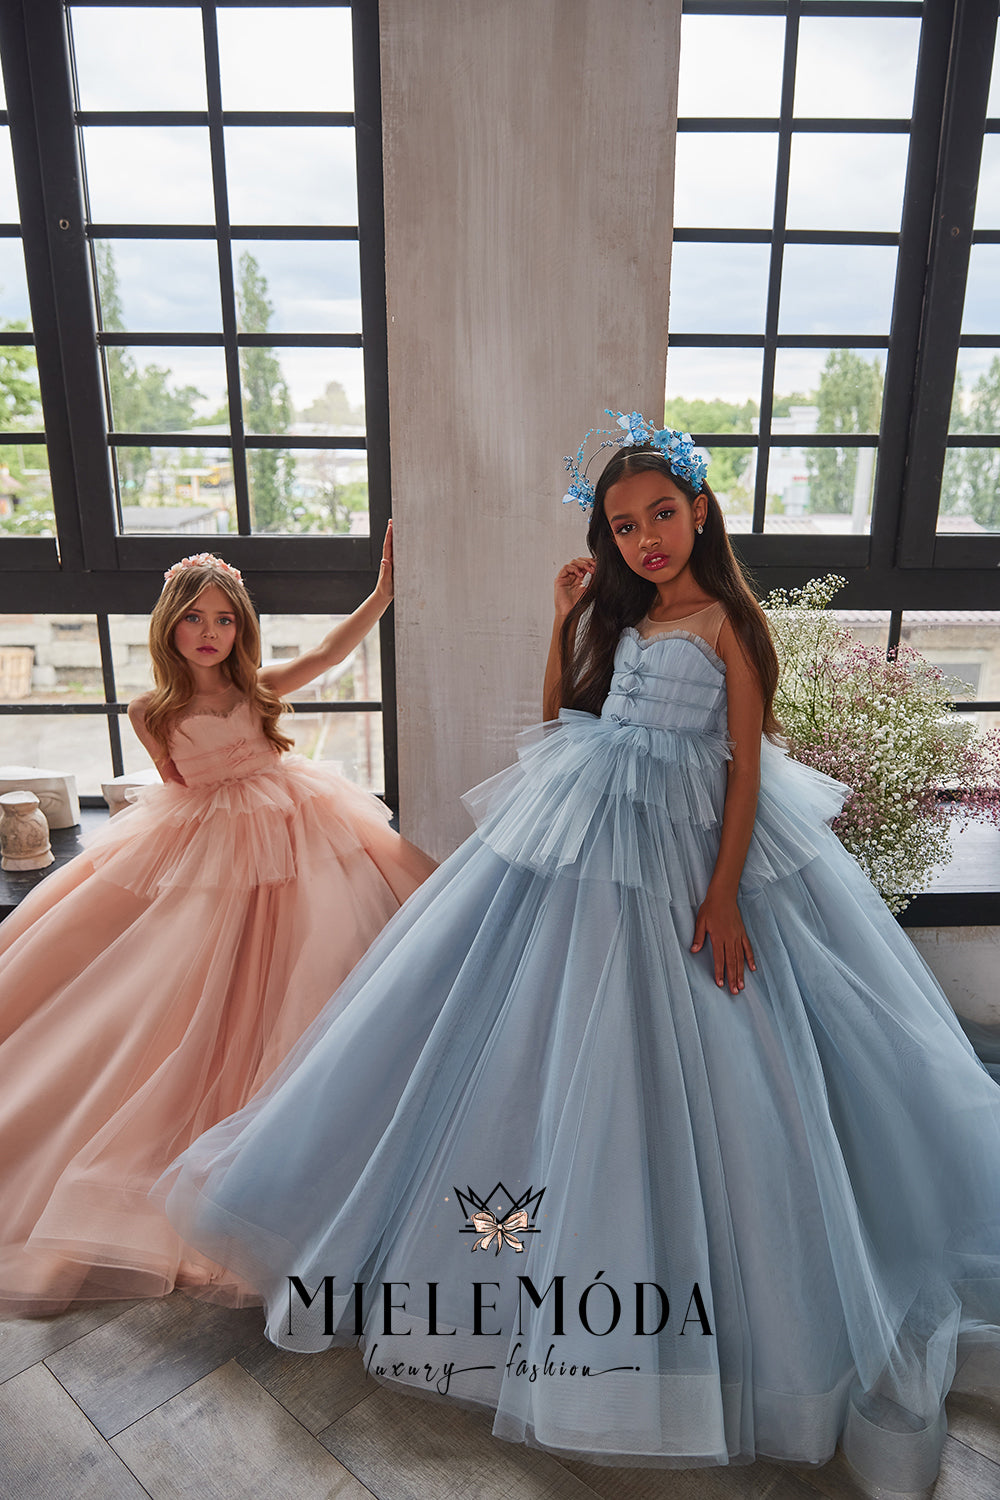 beautiful girls sitting by large window wearing tulle couture dresses in pink and blue modeling for miele moda boutique